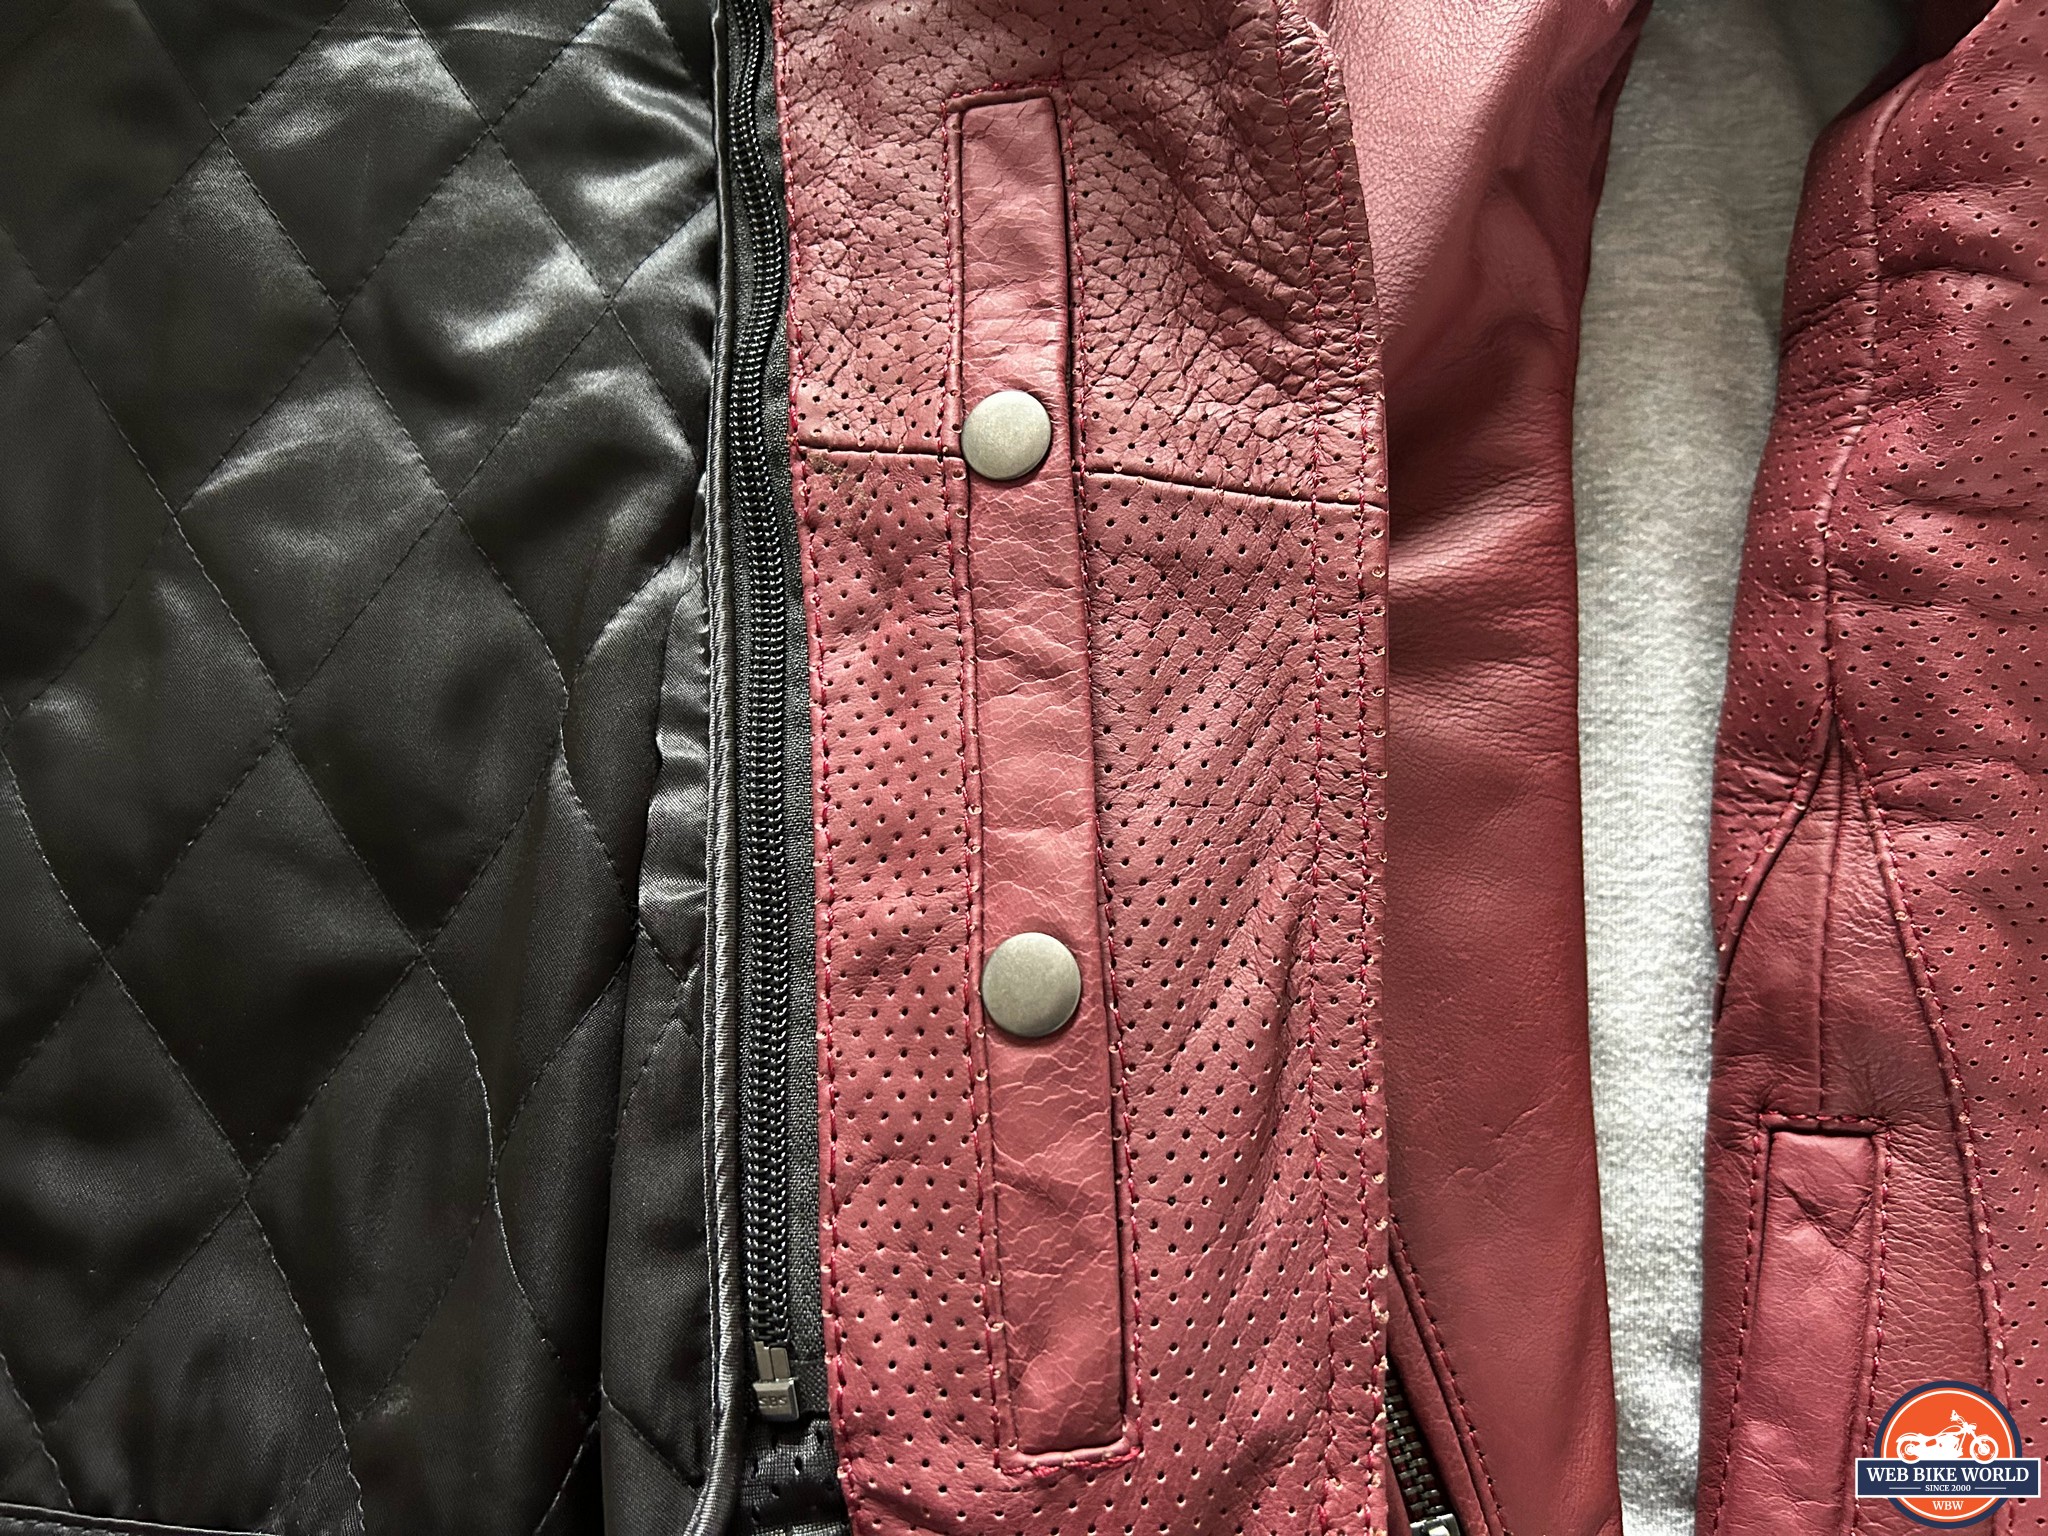 The inside button pocket on the jacket